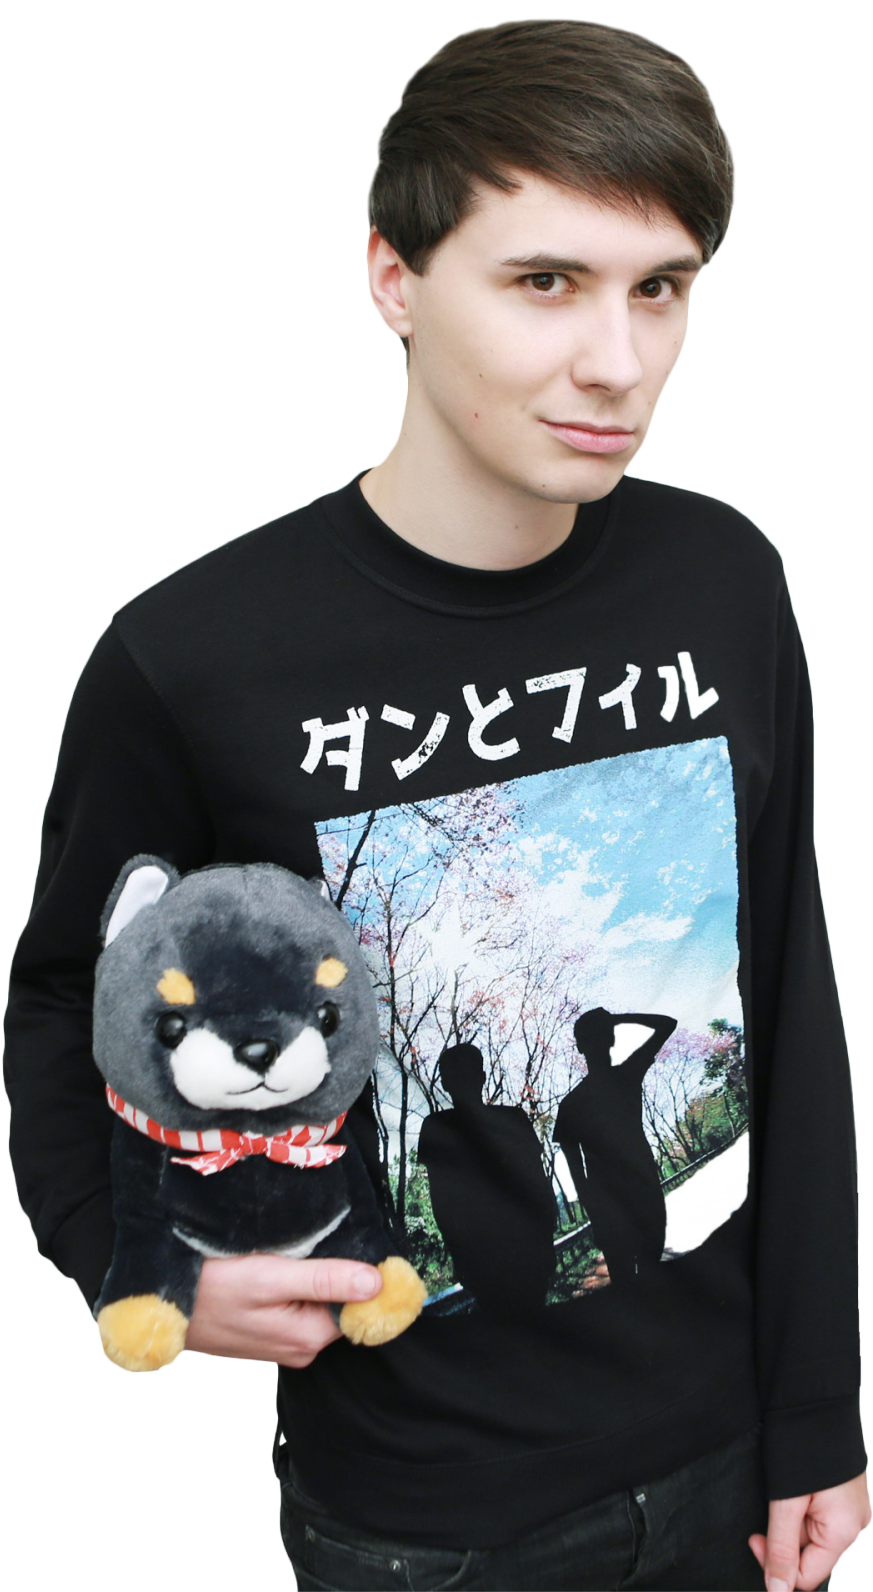 Man Holding Plush Toy With Japanese Text Sweatshirt PNG image